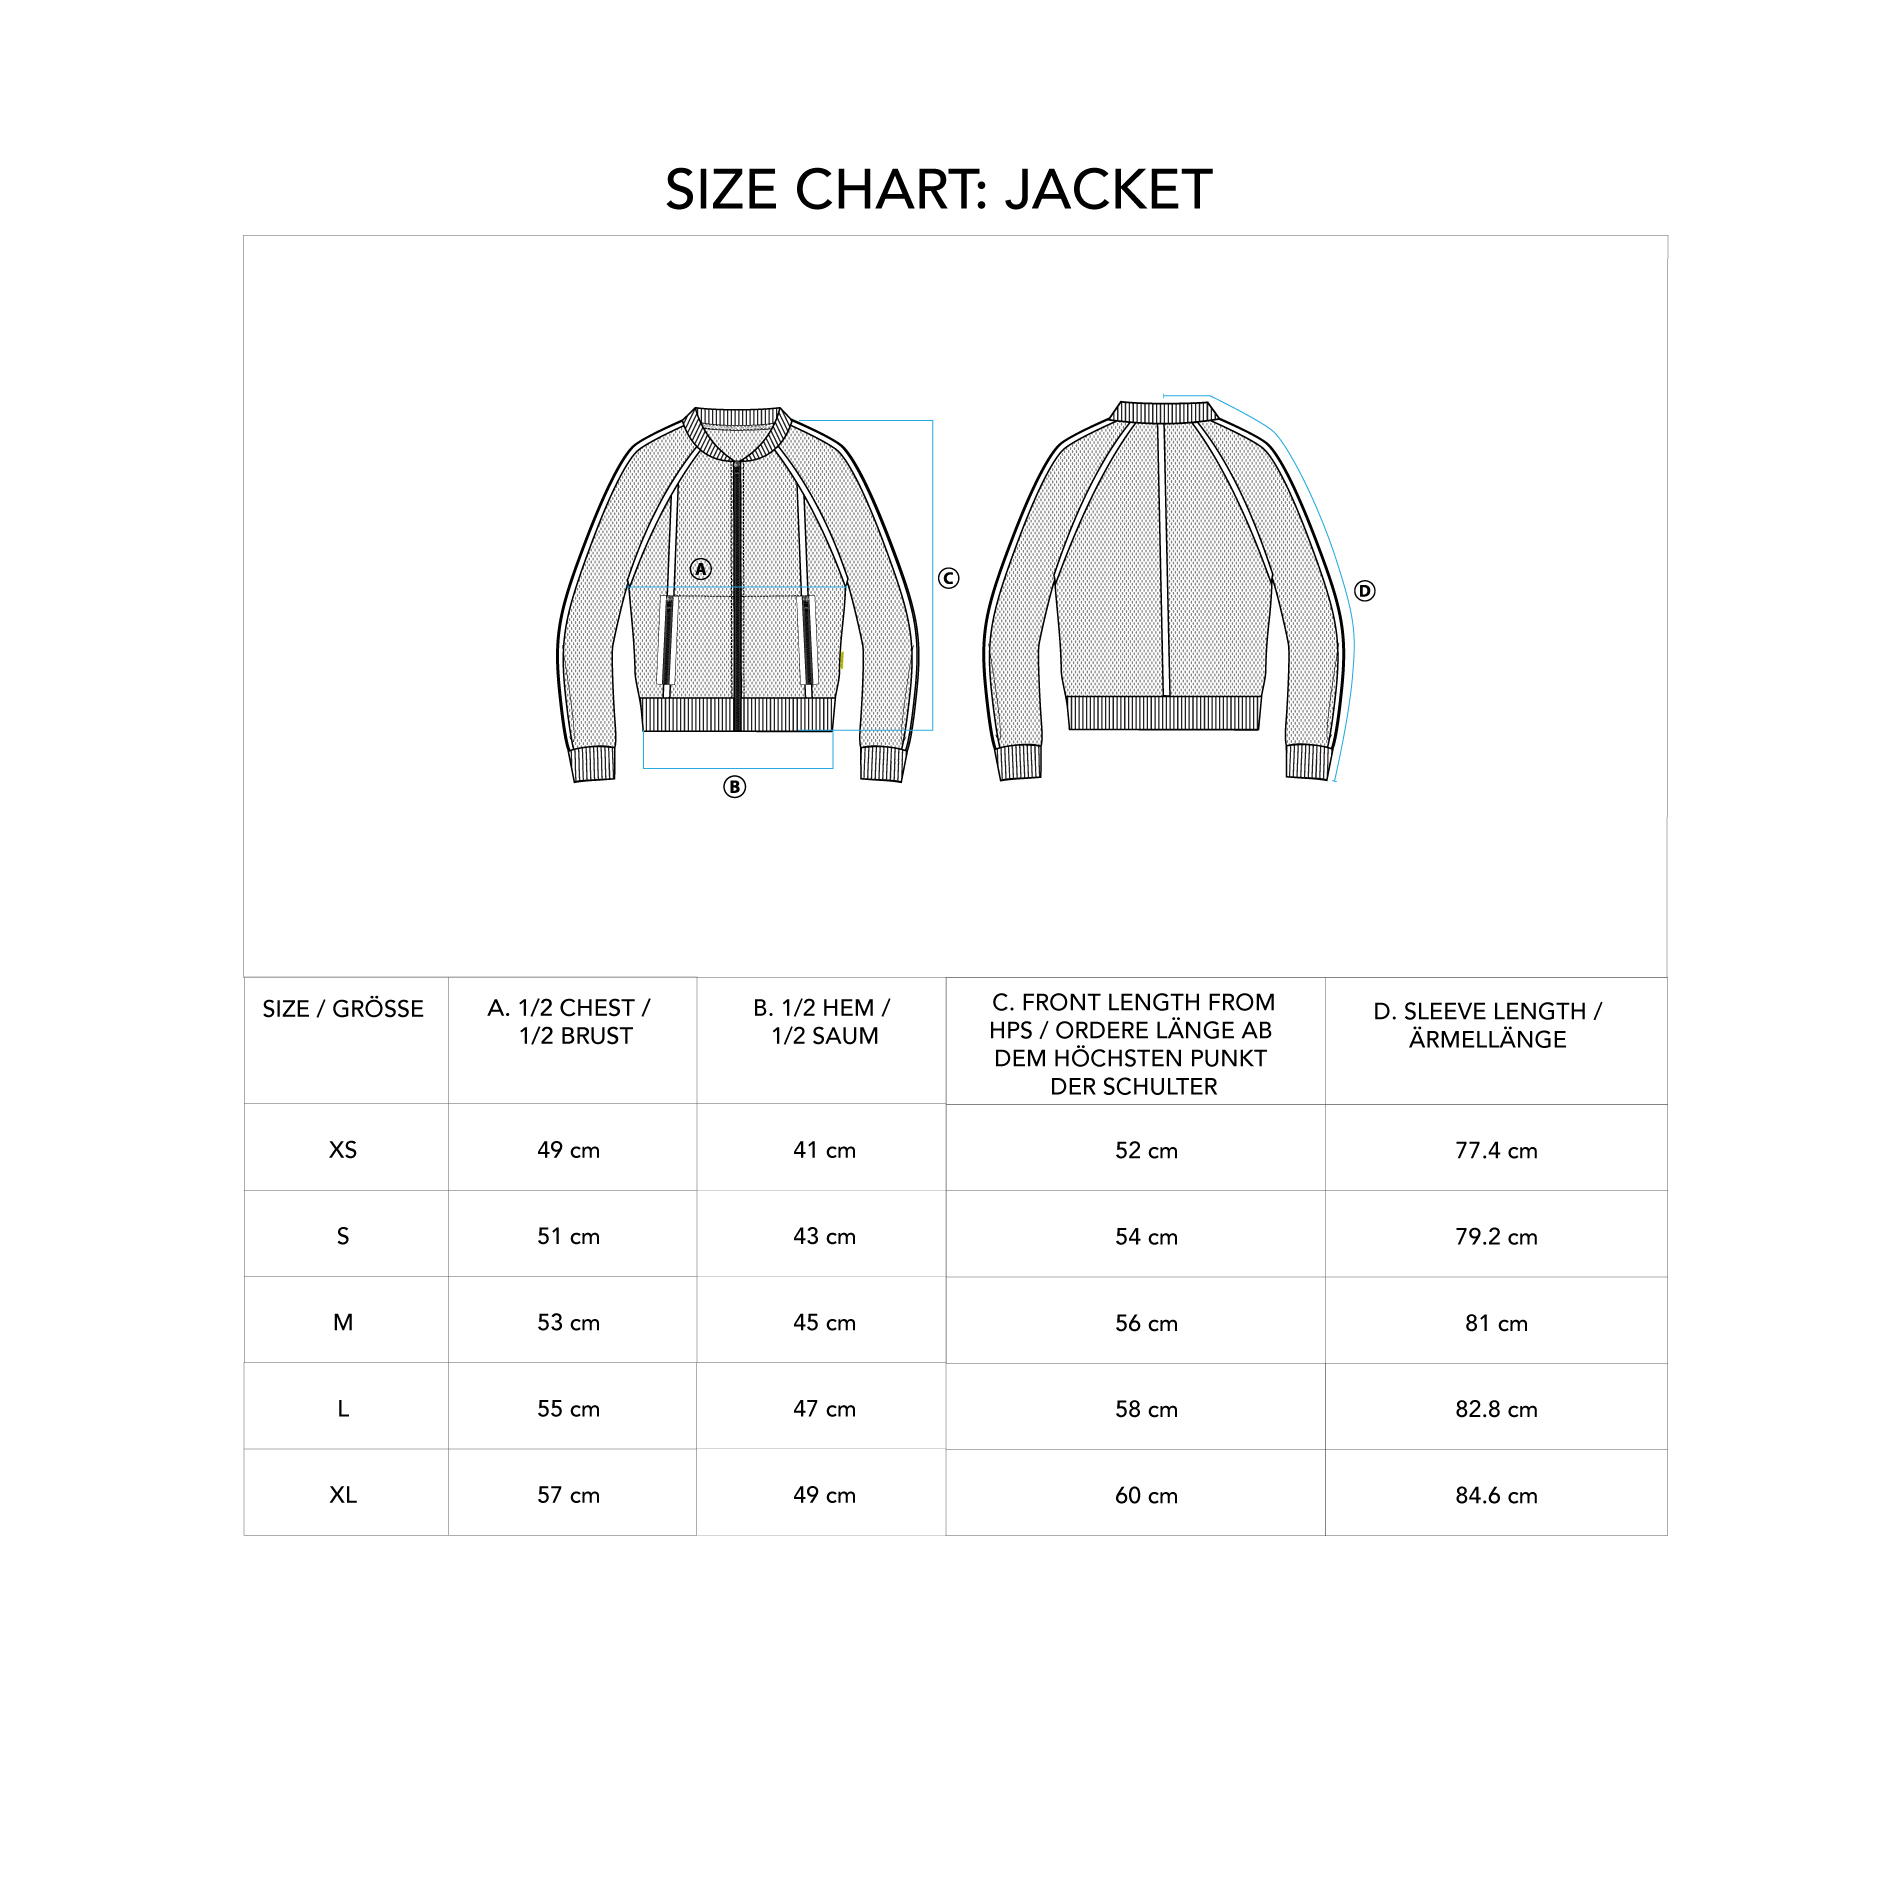 Athleisure Body Mesh Jacket for Women - size chart